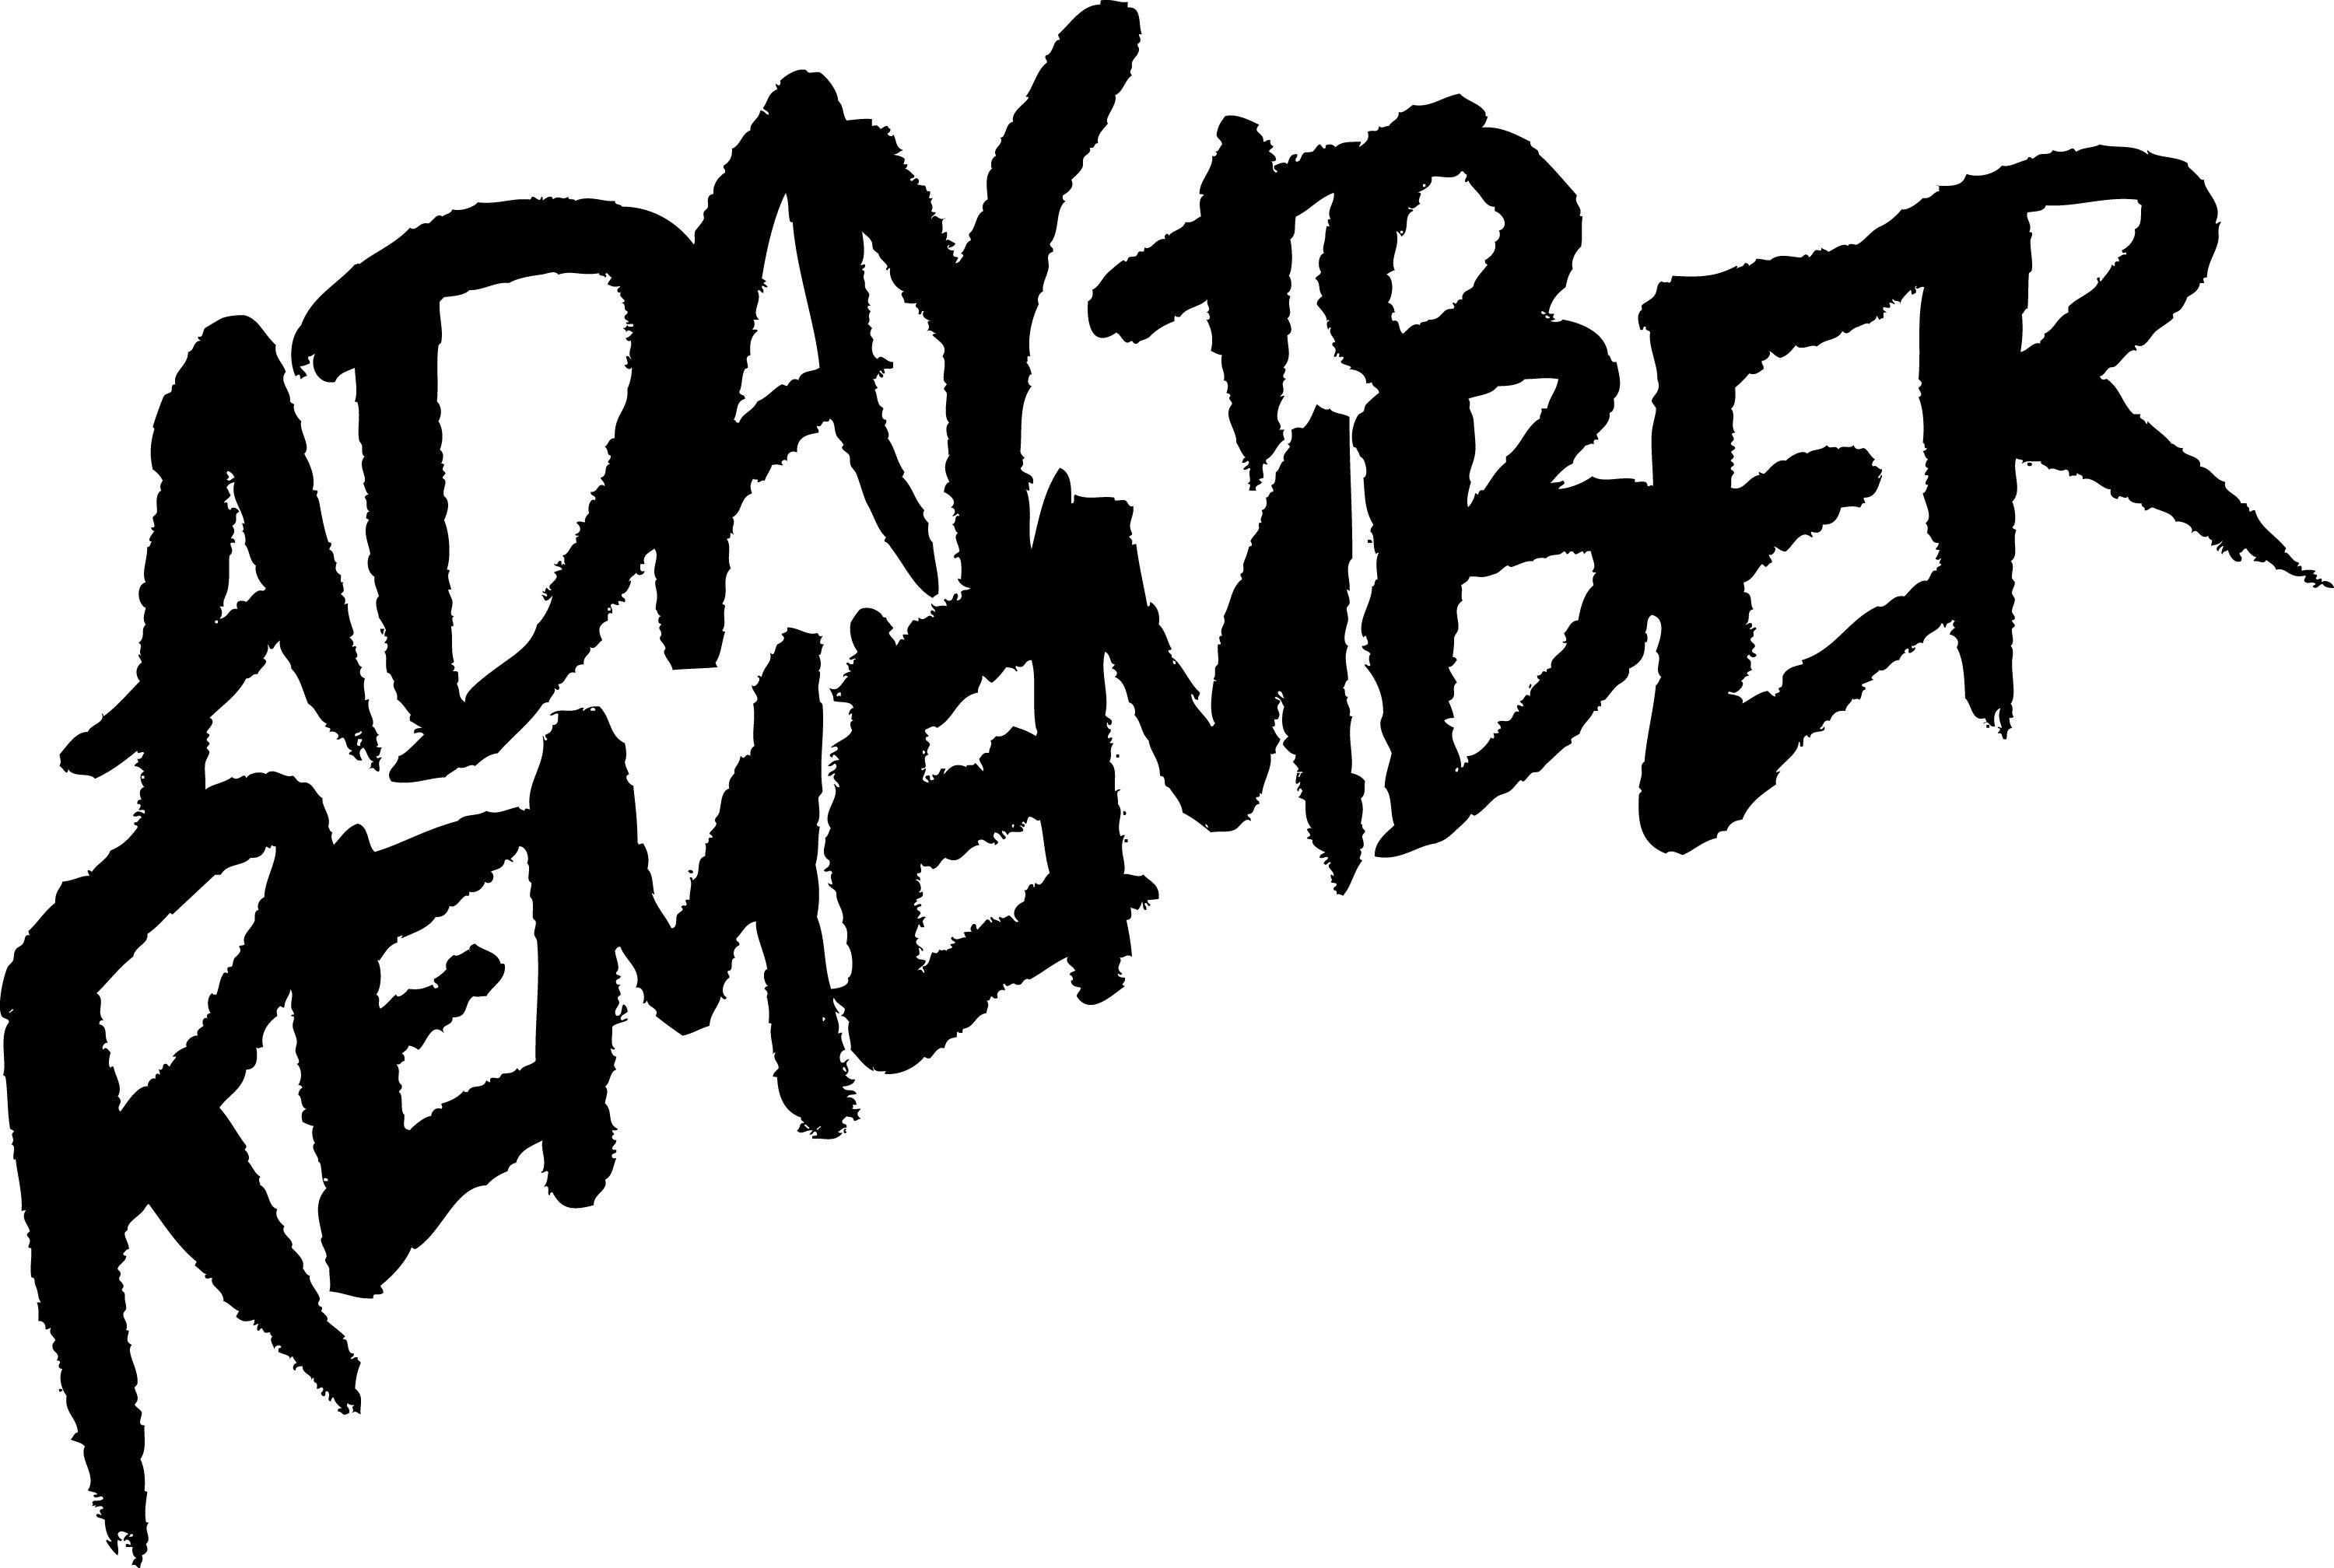 A Day to Remember Logo - A Day To Remember Press Center